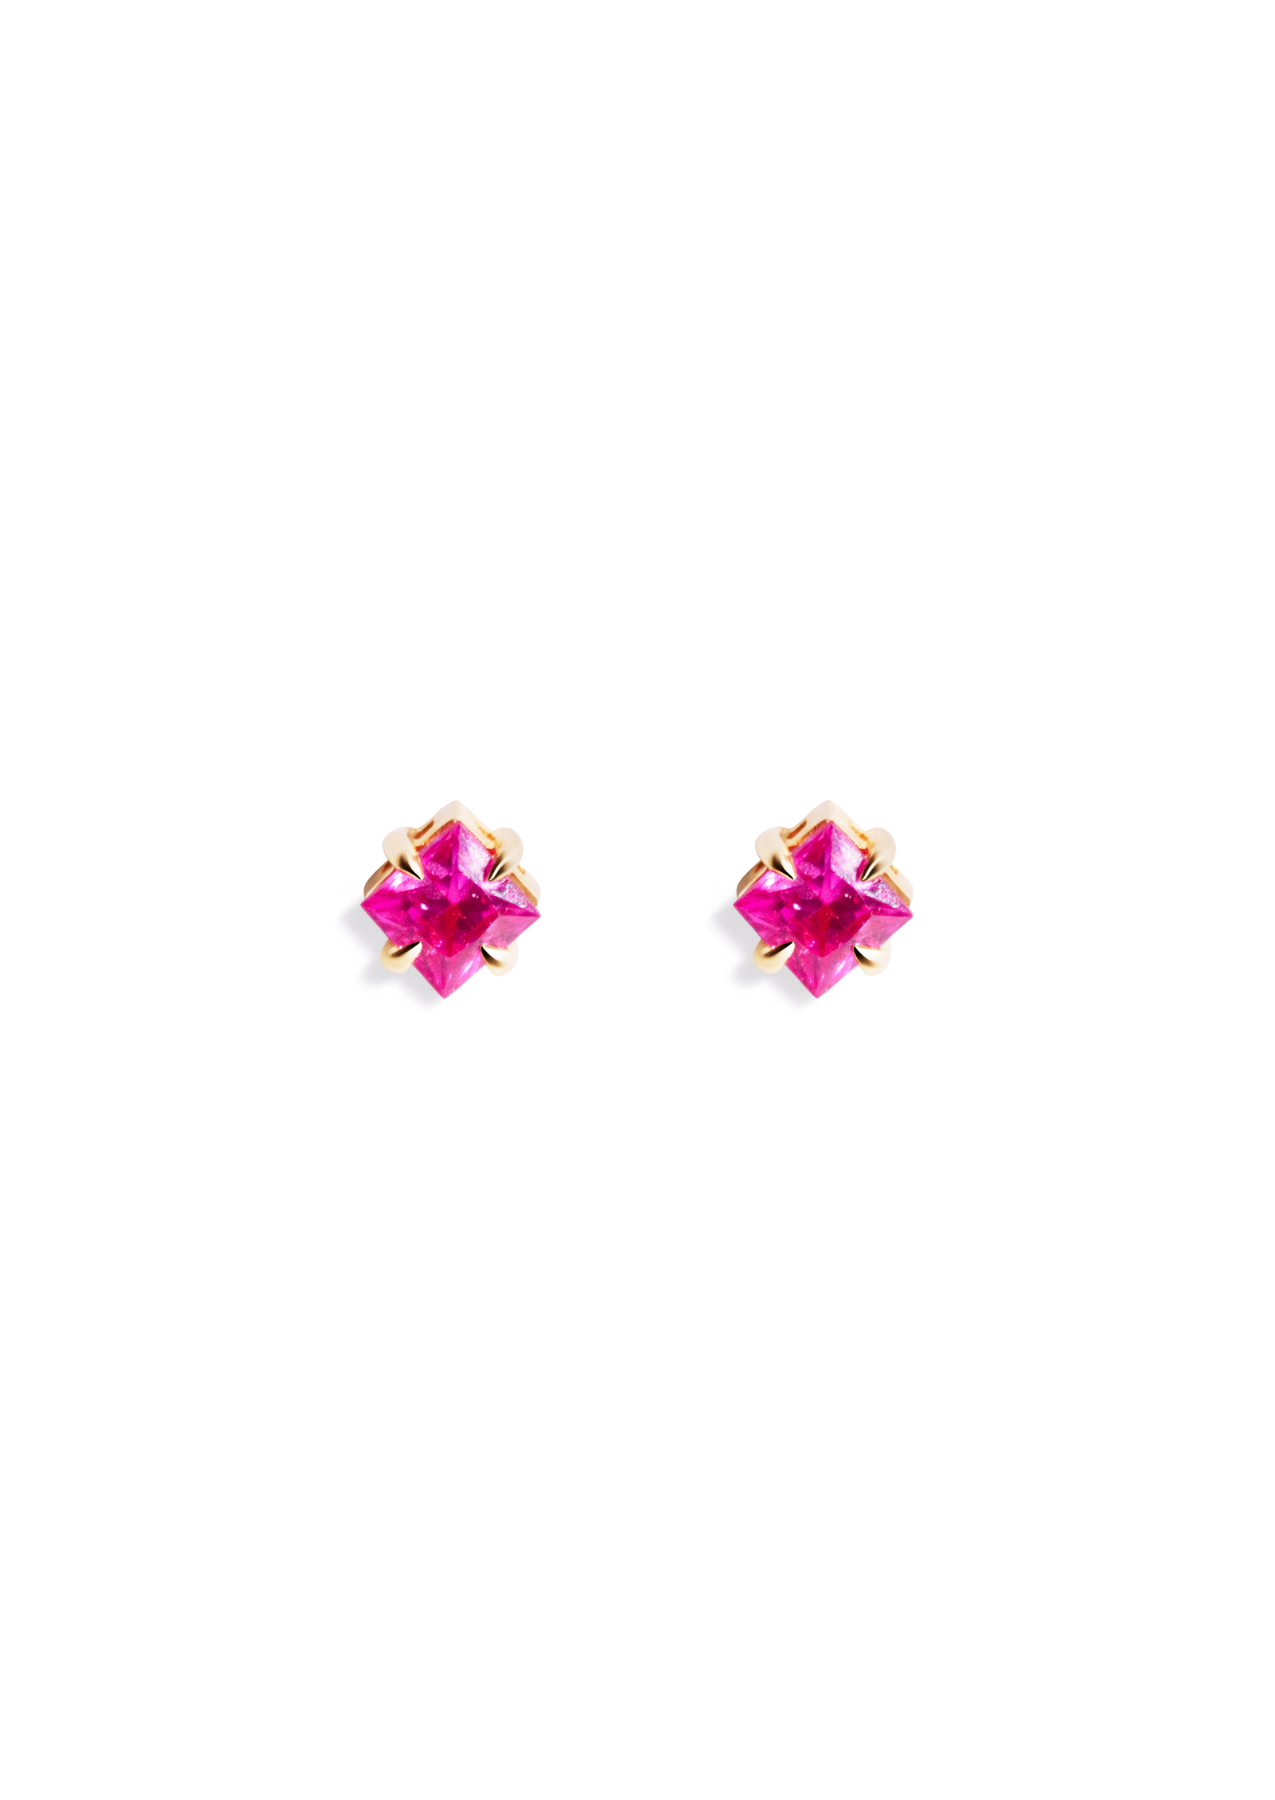 The Poppy Pink Sapphire 9ct Solid Gold Stud Earrings